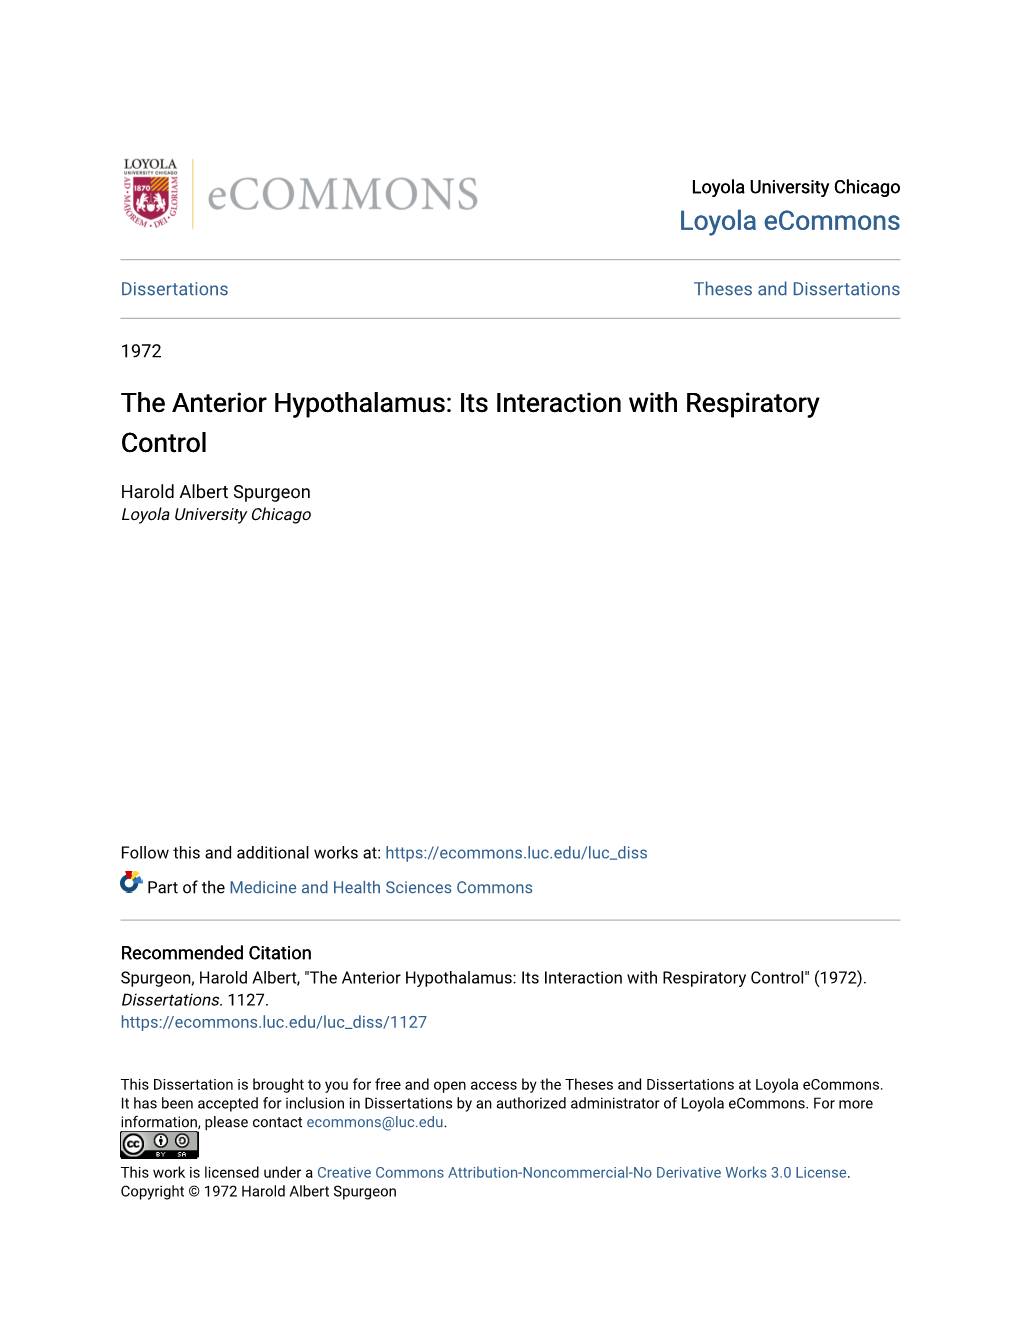 The Anterior Hypothalamus: Its Interaction with Respiratory Control